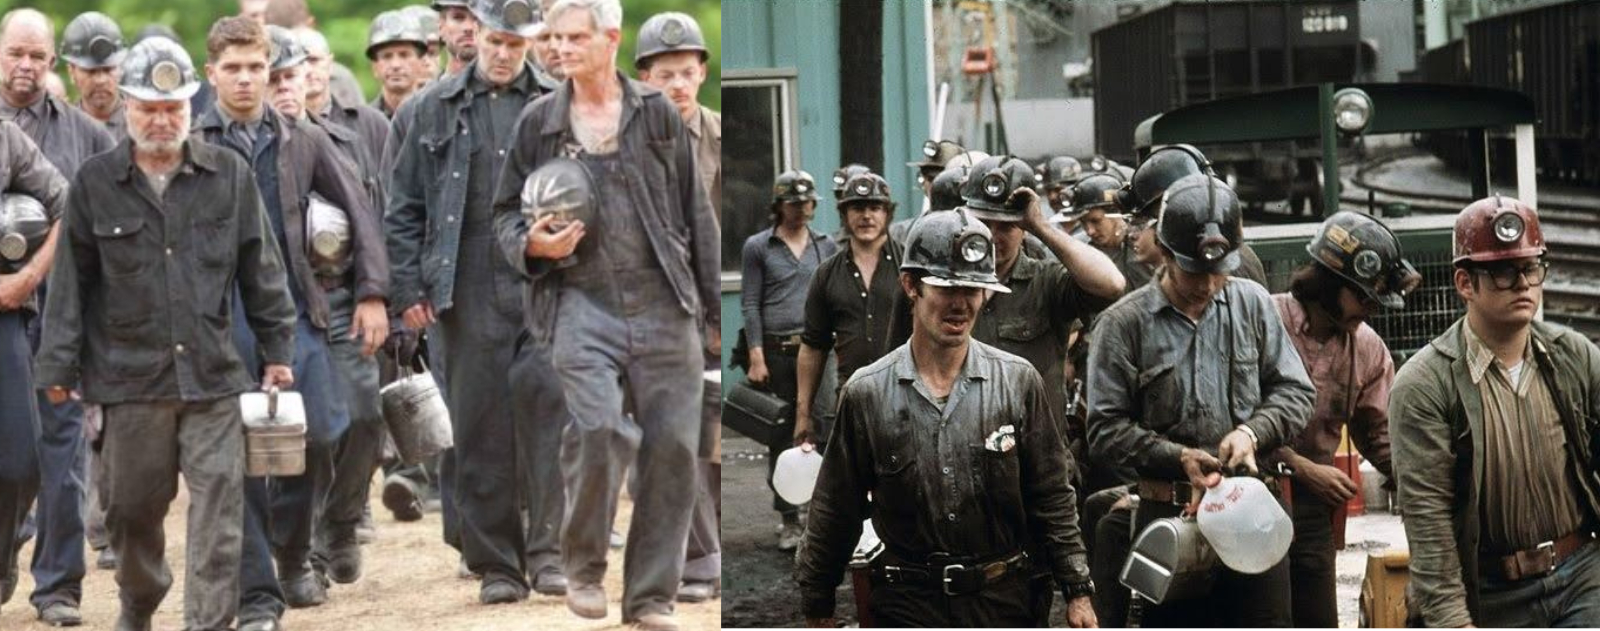 Two images show a group of coal miners walking forward in the open. The image on the left is a scene from the 2012 Hunger Games movie and shows citizens from Panem wearing helments, dark clothing, and carrying lunch boxes. The image on the right features a historical image of coal miners in the same setting from the mid 20th century. 